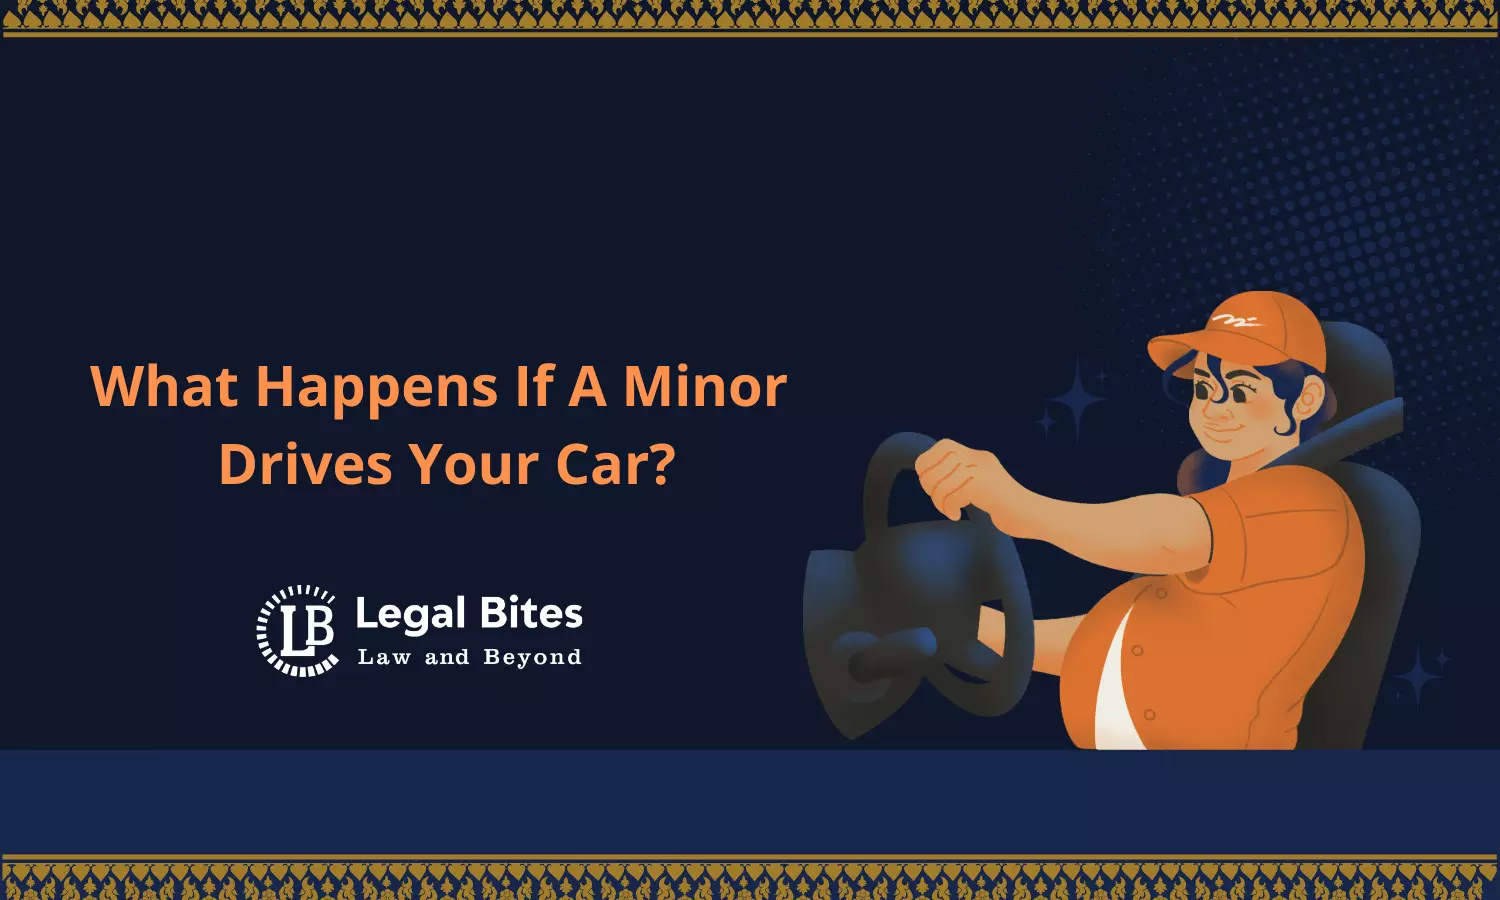 What Happens If A Minor Drives Your Car?